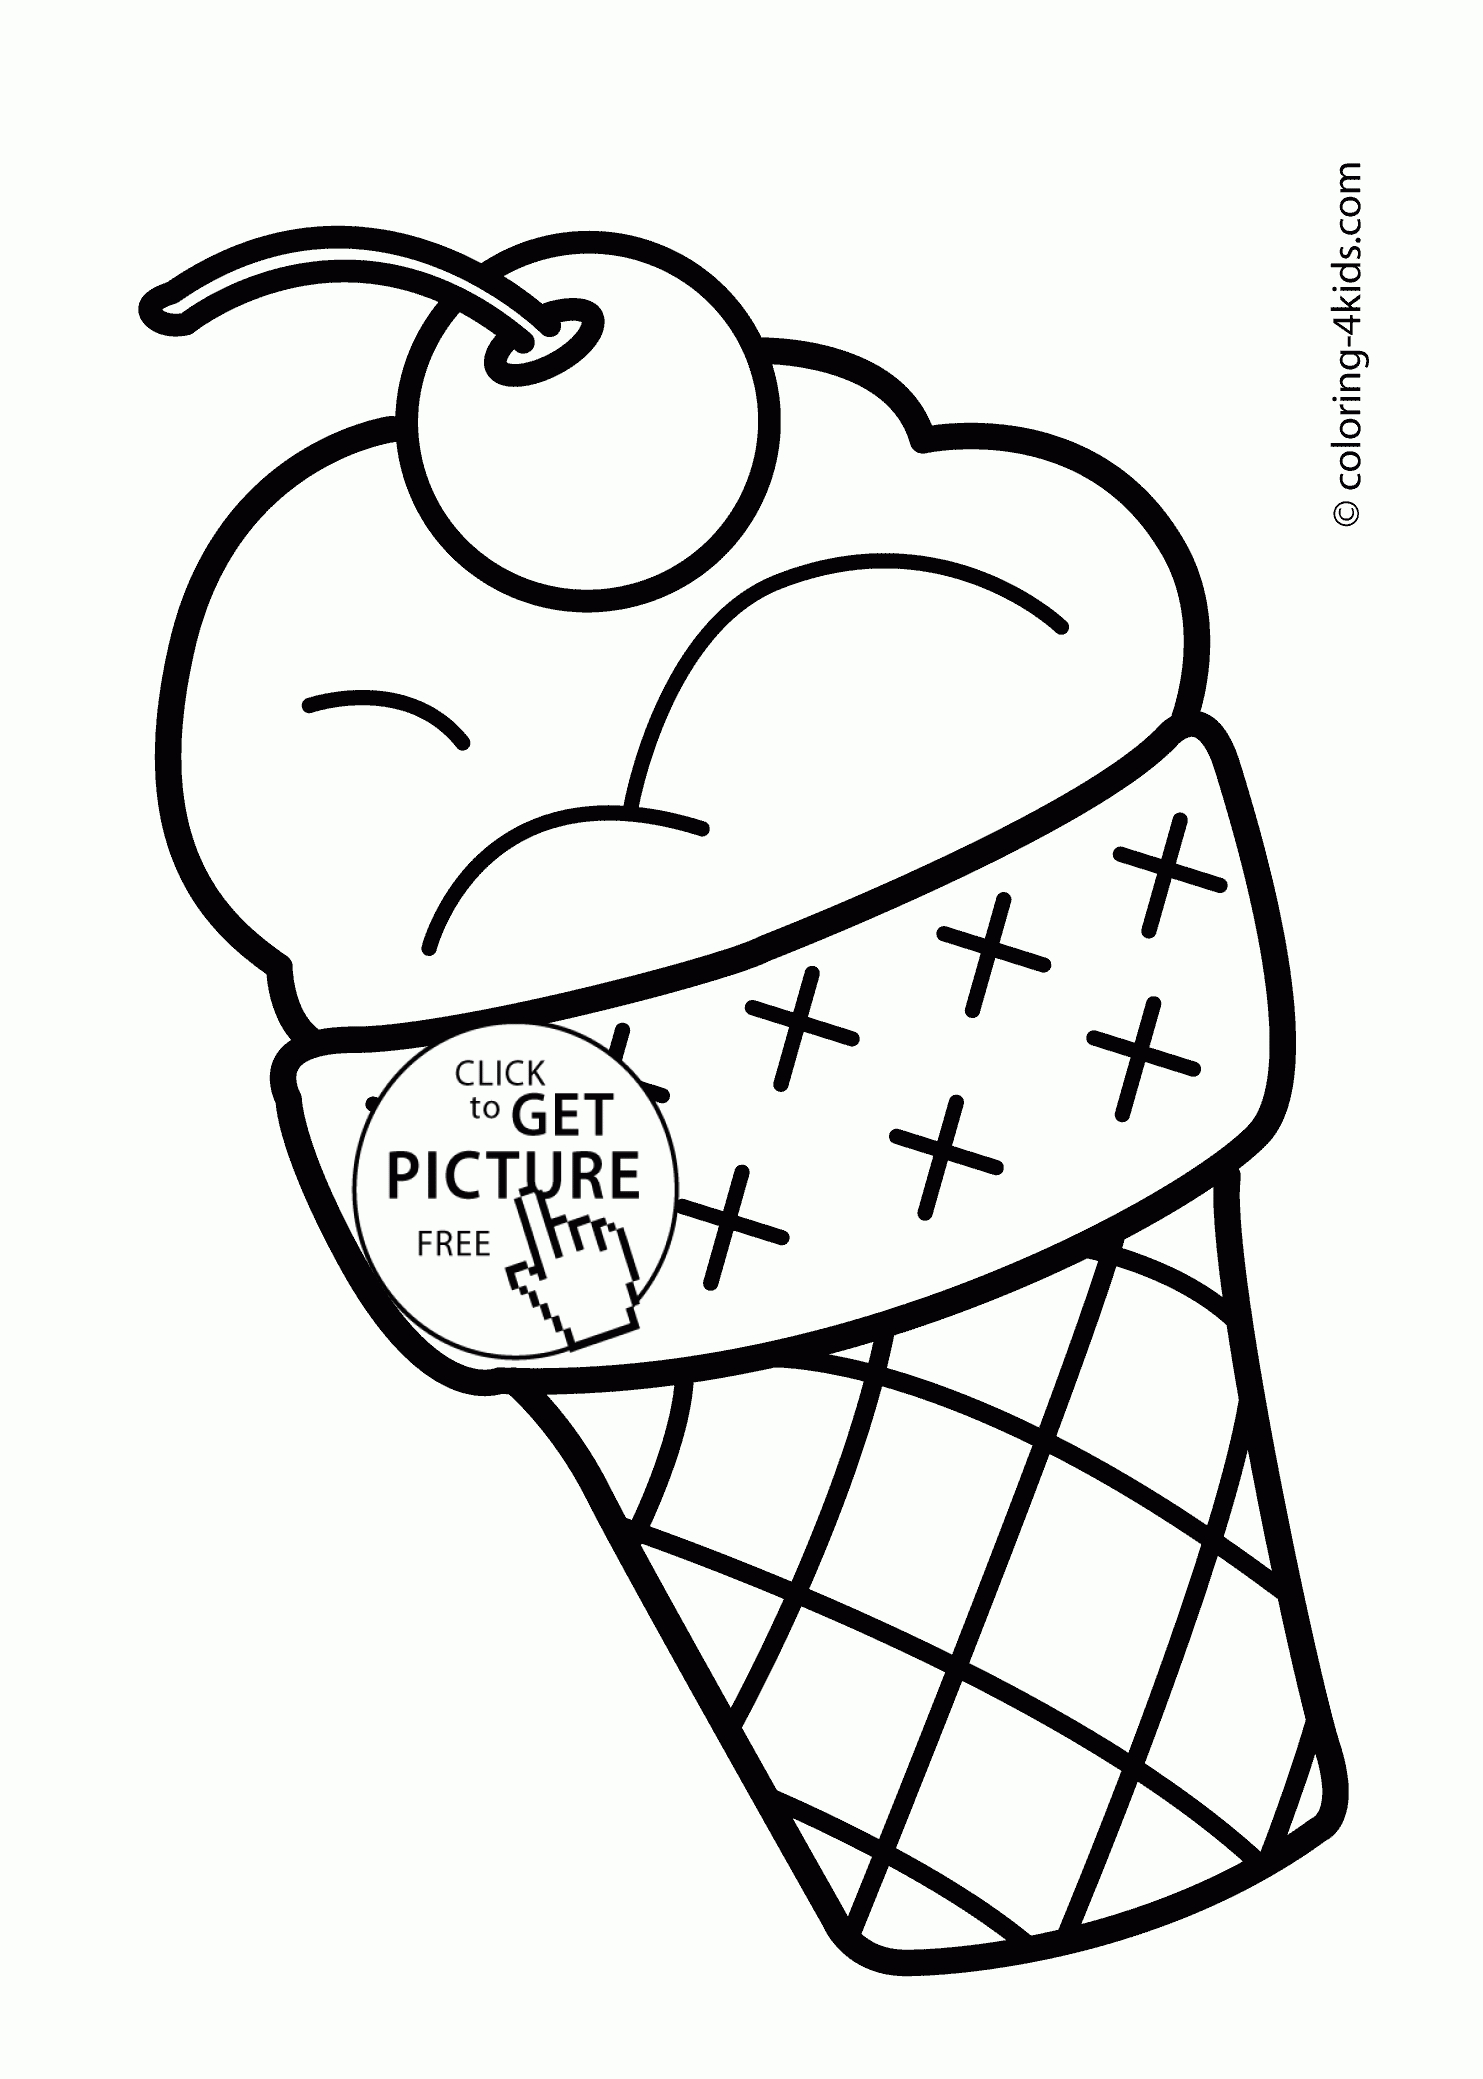 Summer Coloring Pages With Ice Cream For Kids, Seasons Coloring - Summer Coloring Sheets Free Printable